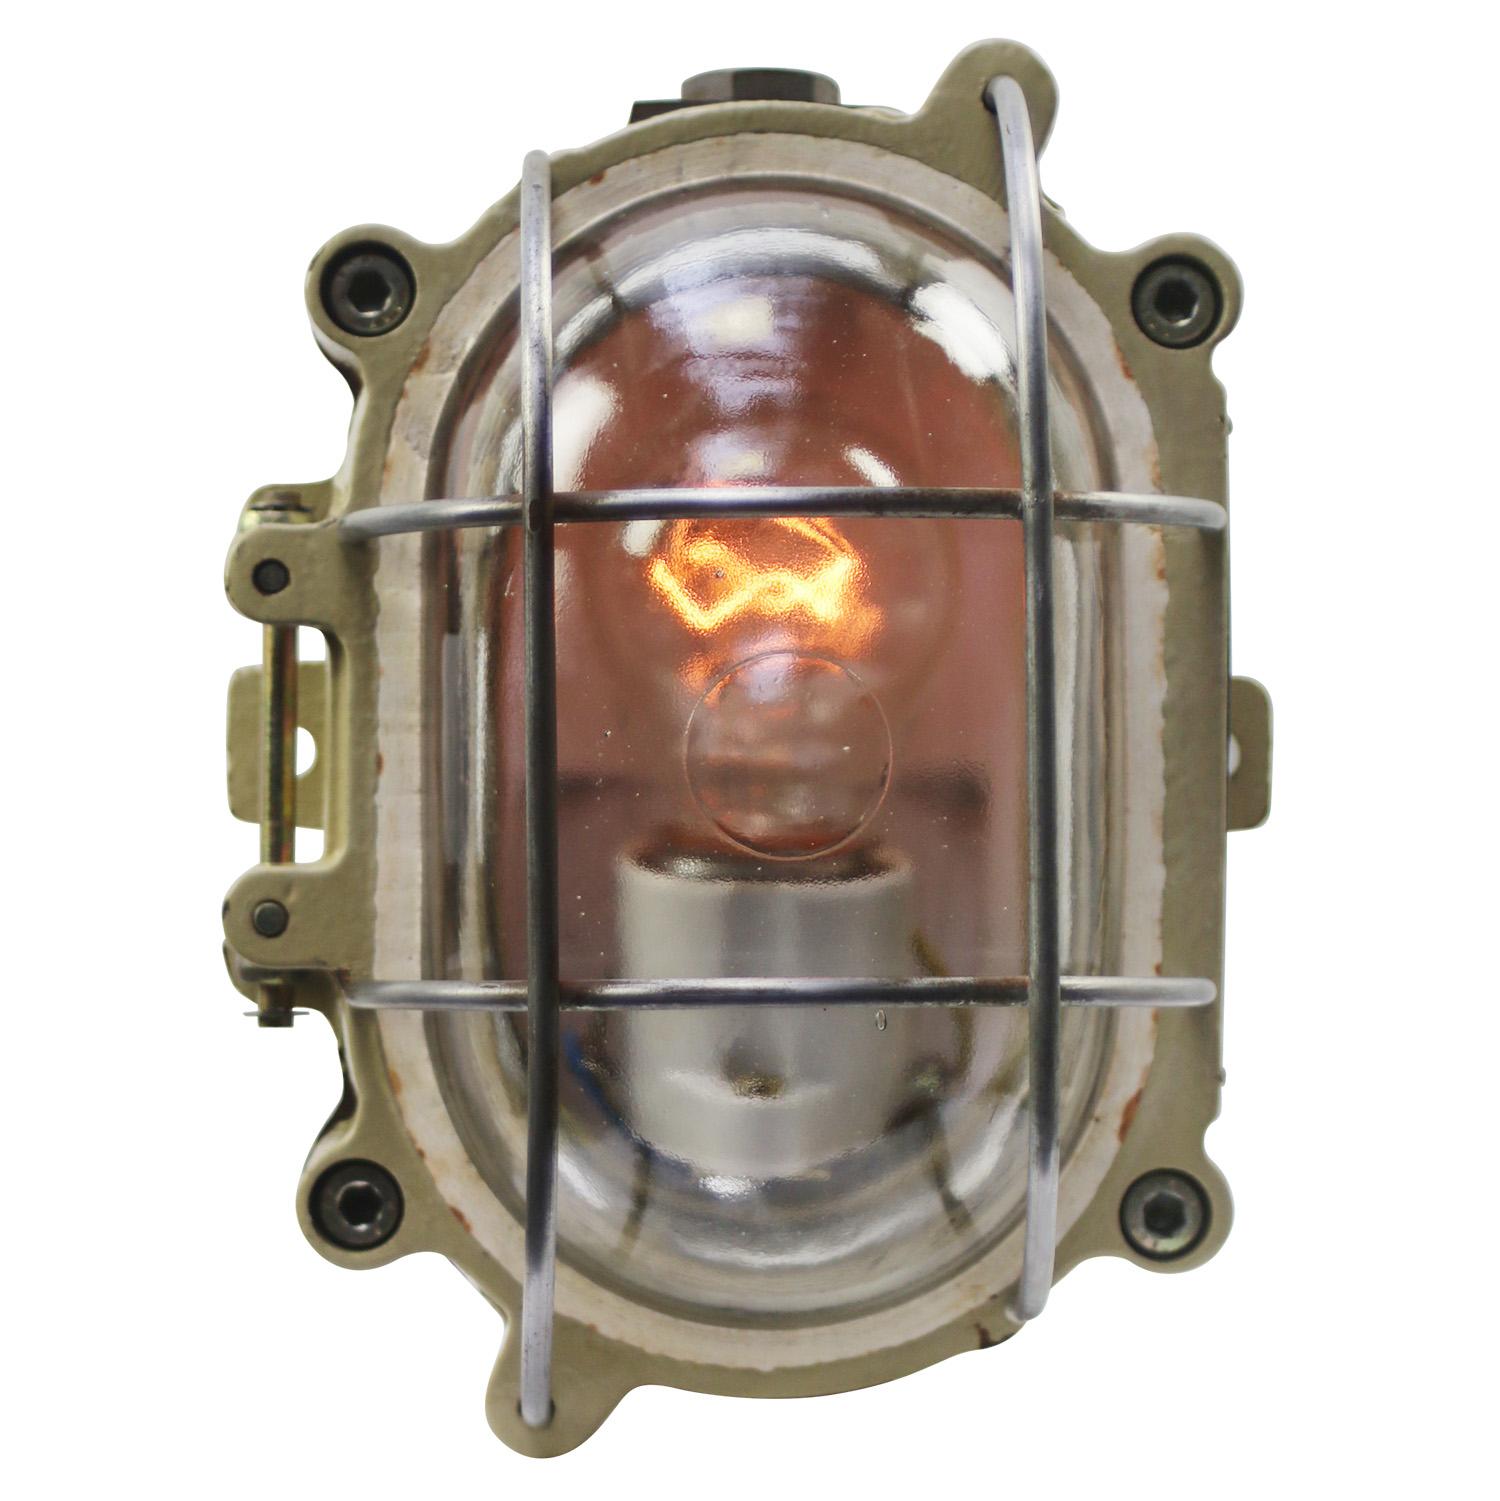 Industrial wall or ceiling lamp made by Mapelec, Amiens, France
Brown / Beige cast iron, clear glass

Weight: 5.70 kg / 12.6 lb

Priced per individual item. All lamps have been made suitable by international standards for incandescent light bulbs,